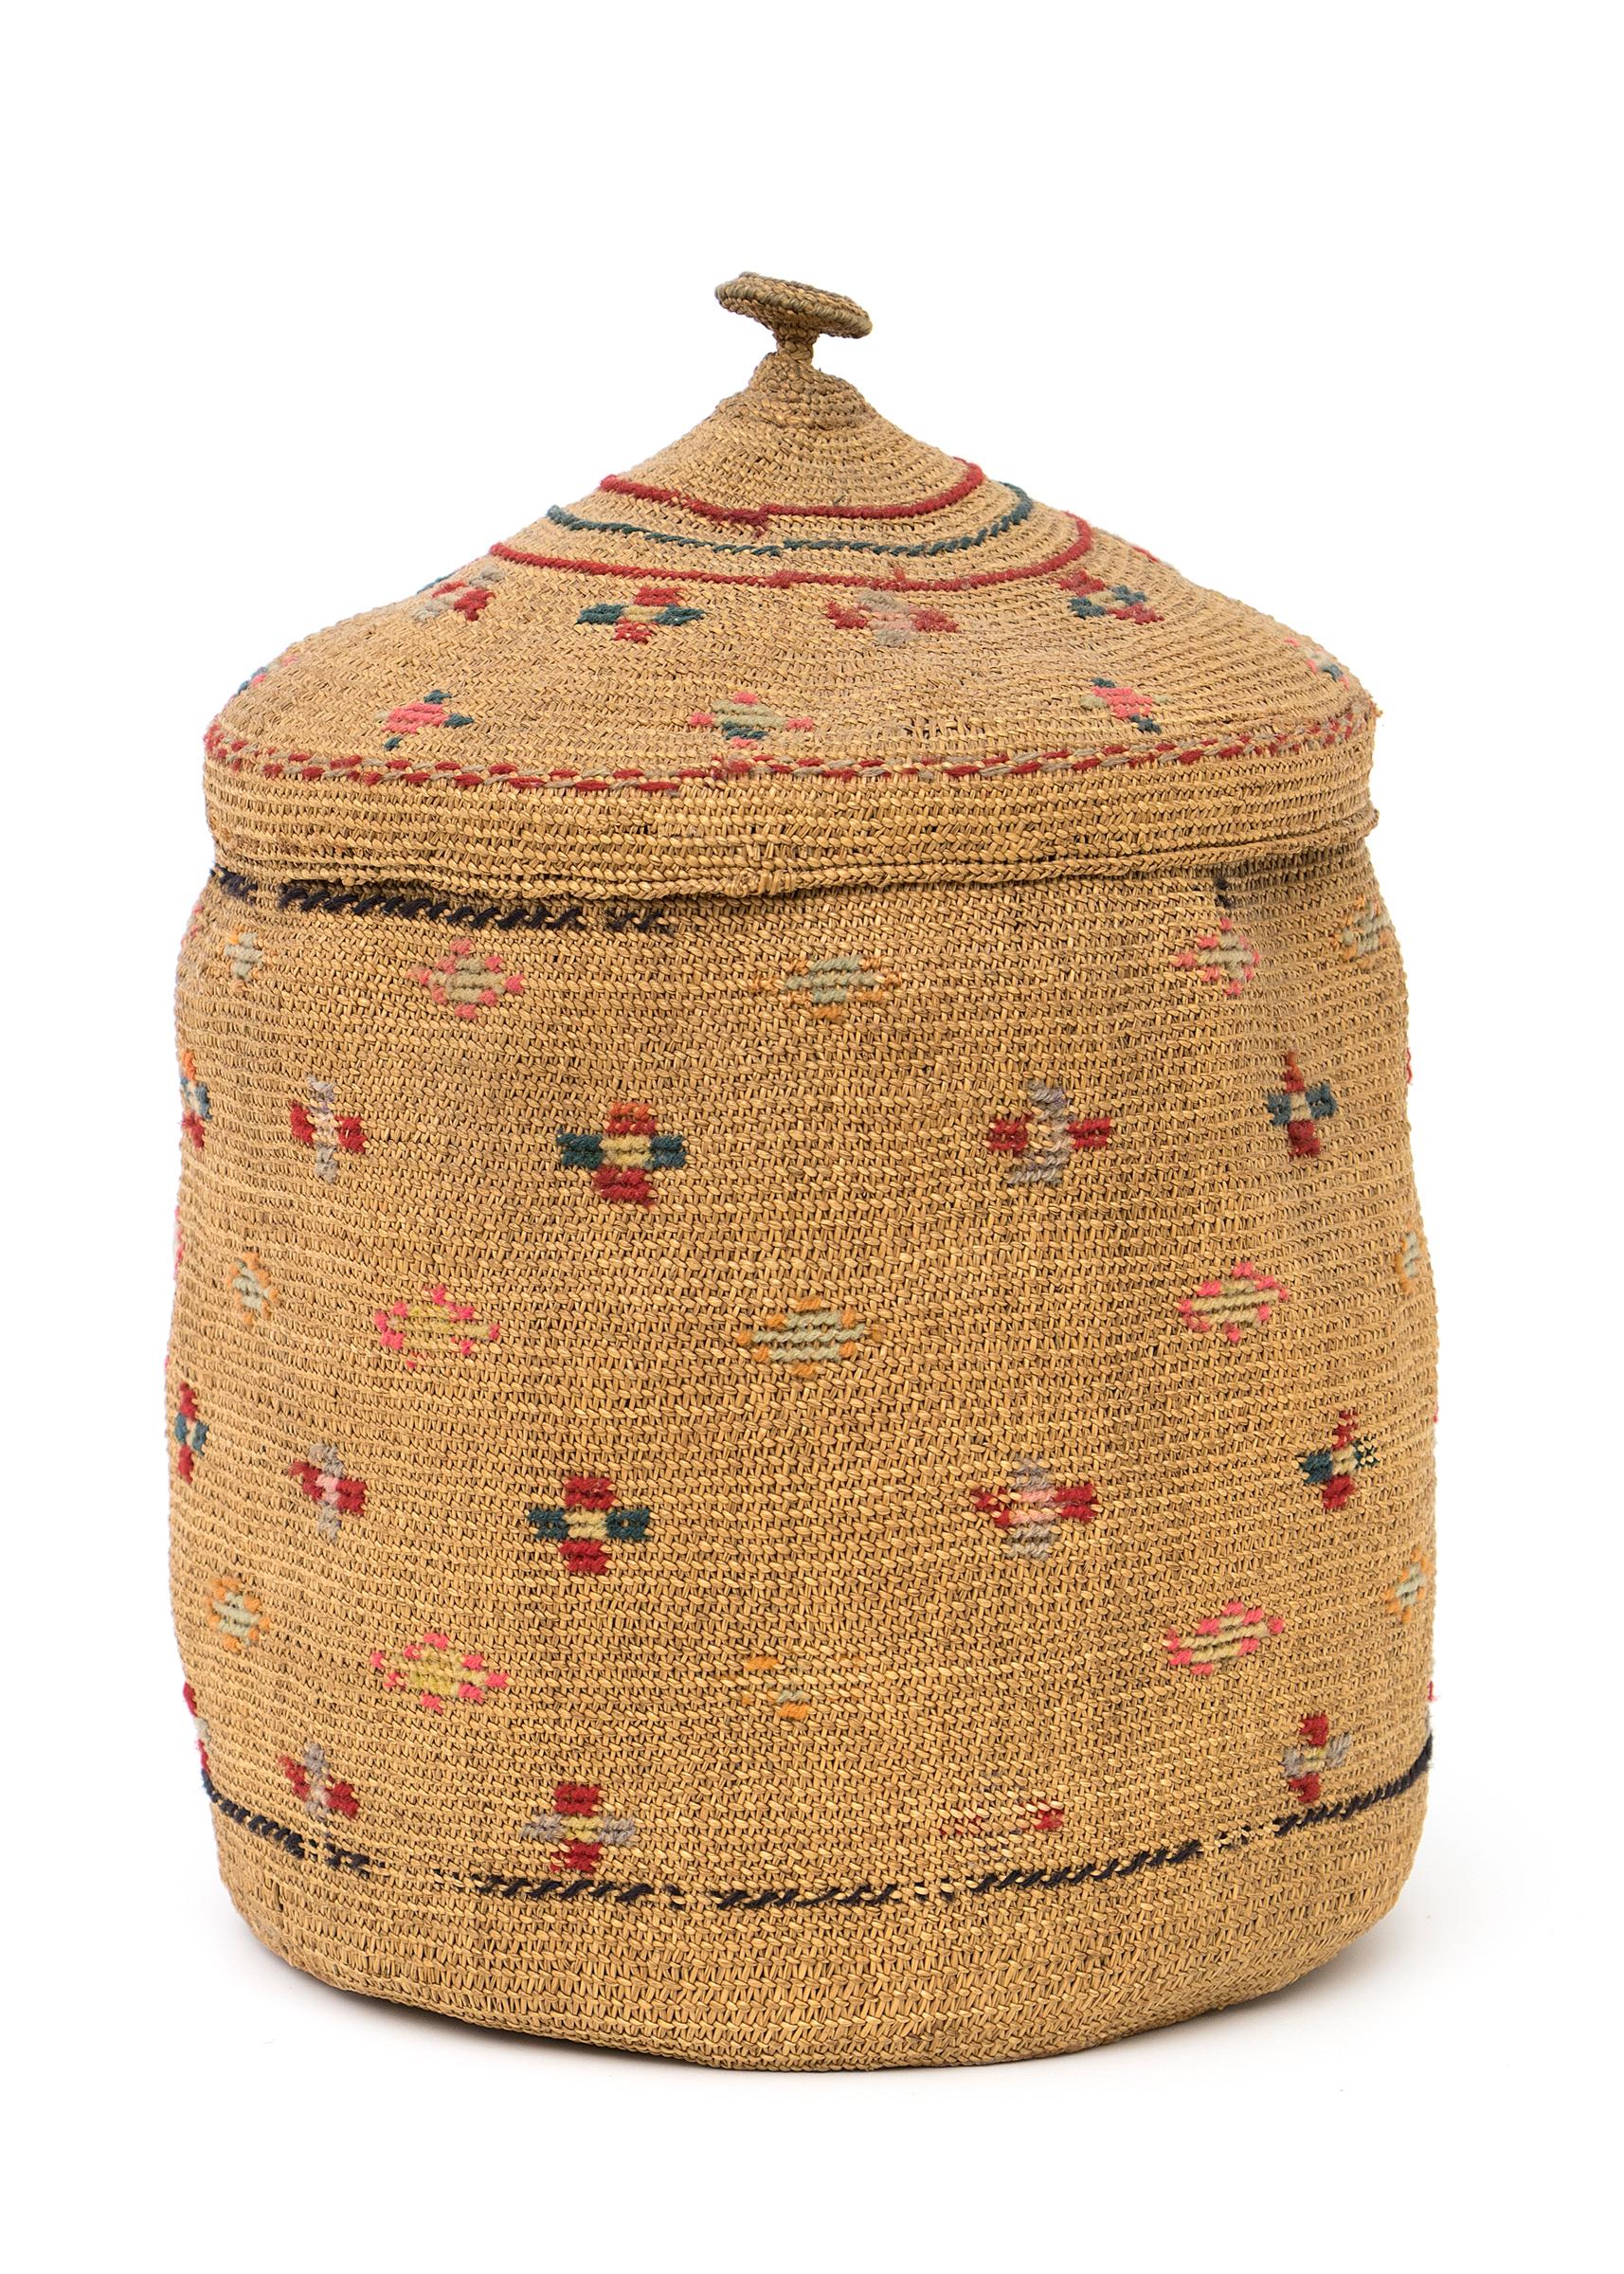 Canadian Northwest Coast 1900 Woven Basket with Top, Multicolor Cross Patterns, Table Top For Sale